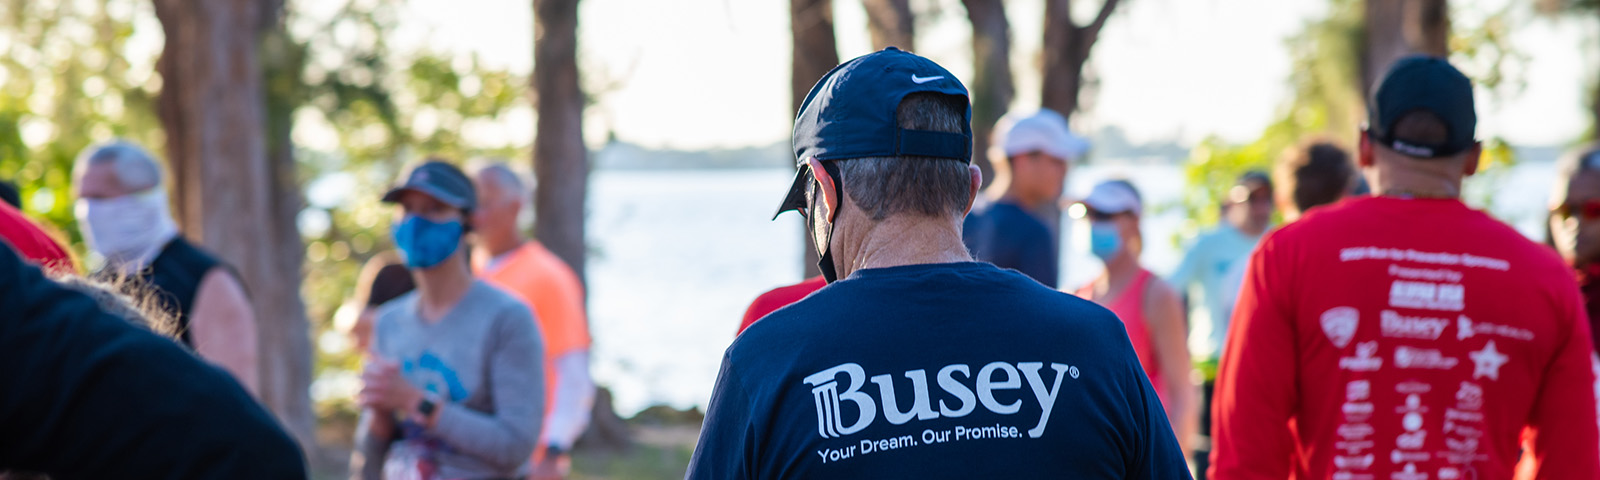 Busey Volunteerism with Run for Prevention